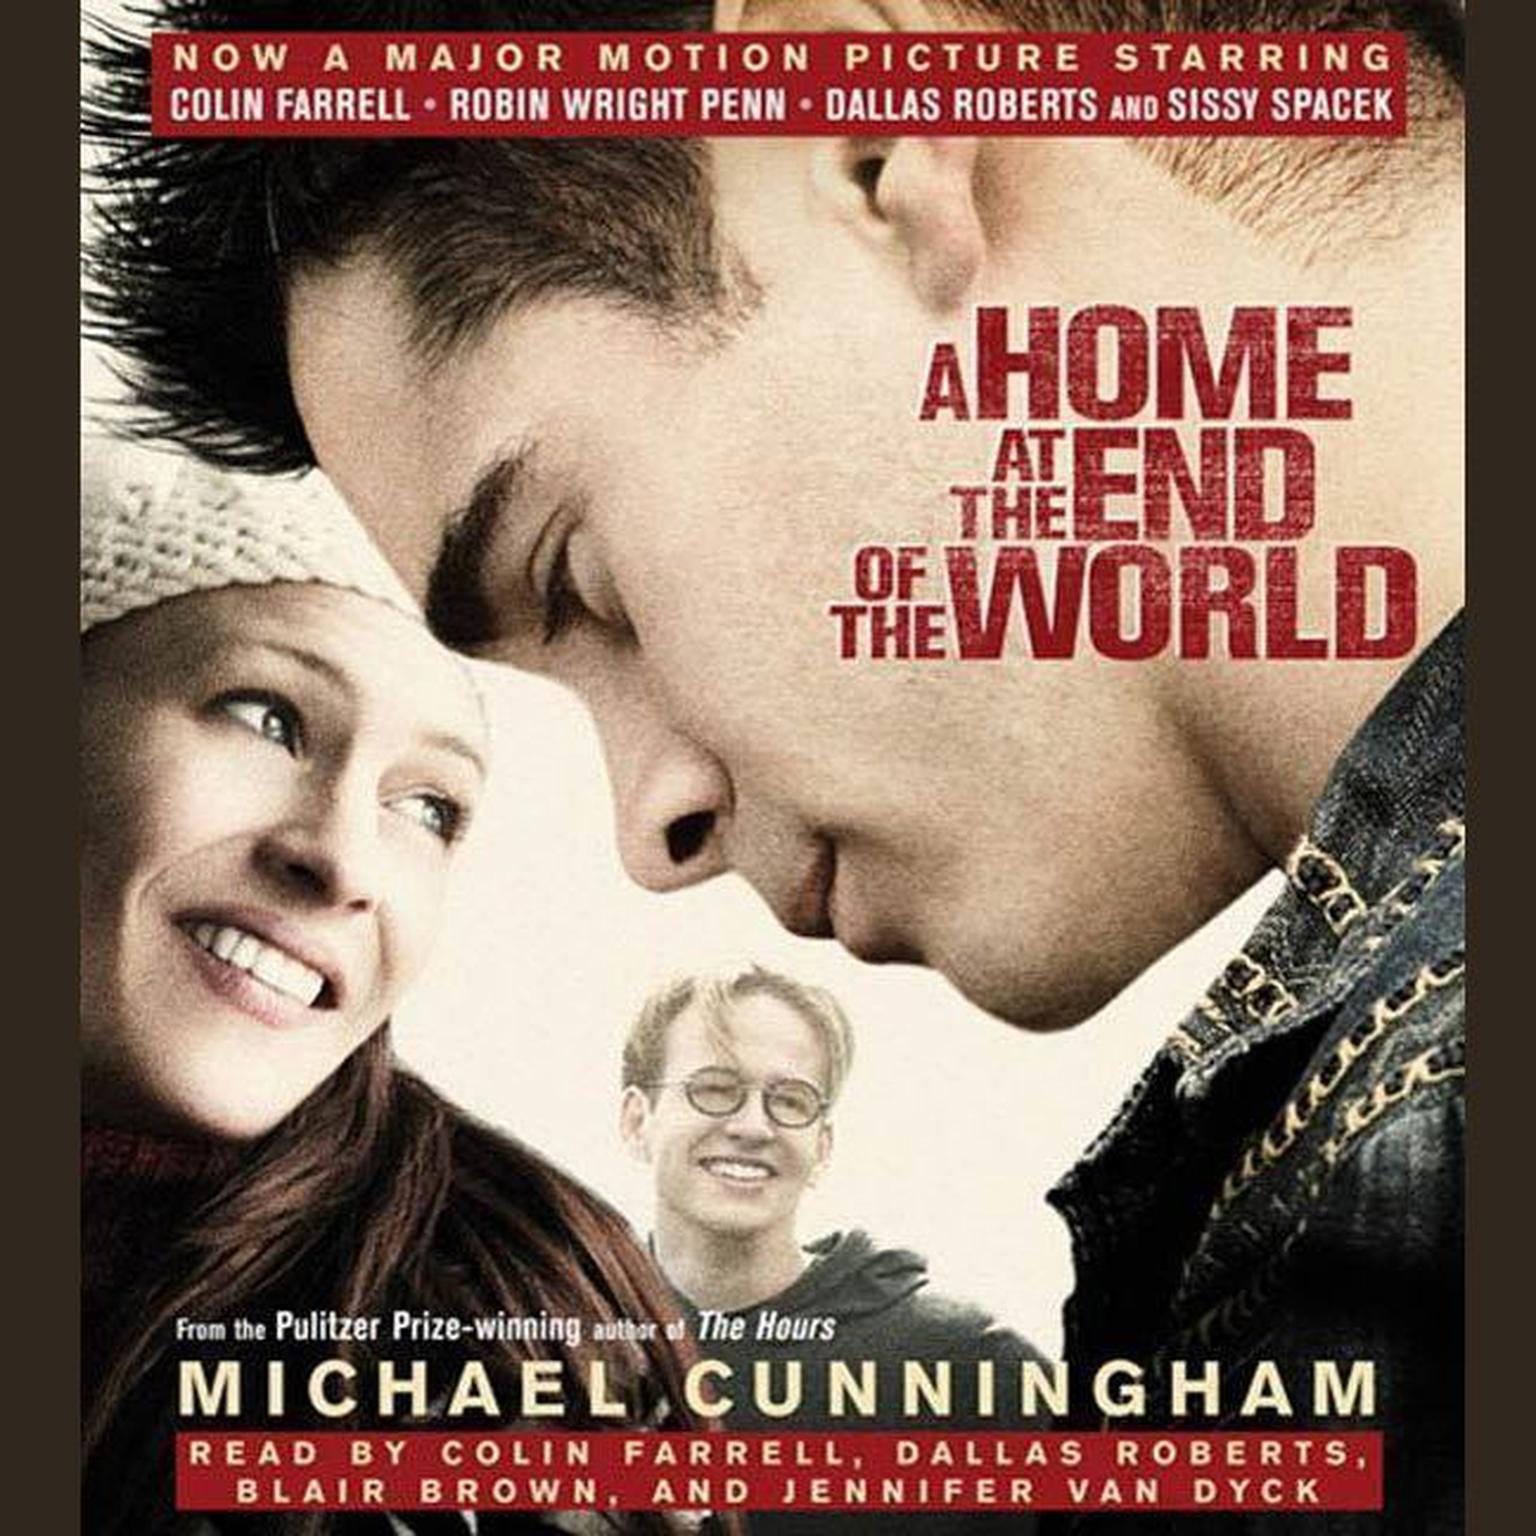 A Home at the End of the World (Abridged): A Novel Audiobook, by Michael Cunningham